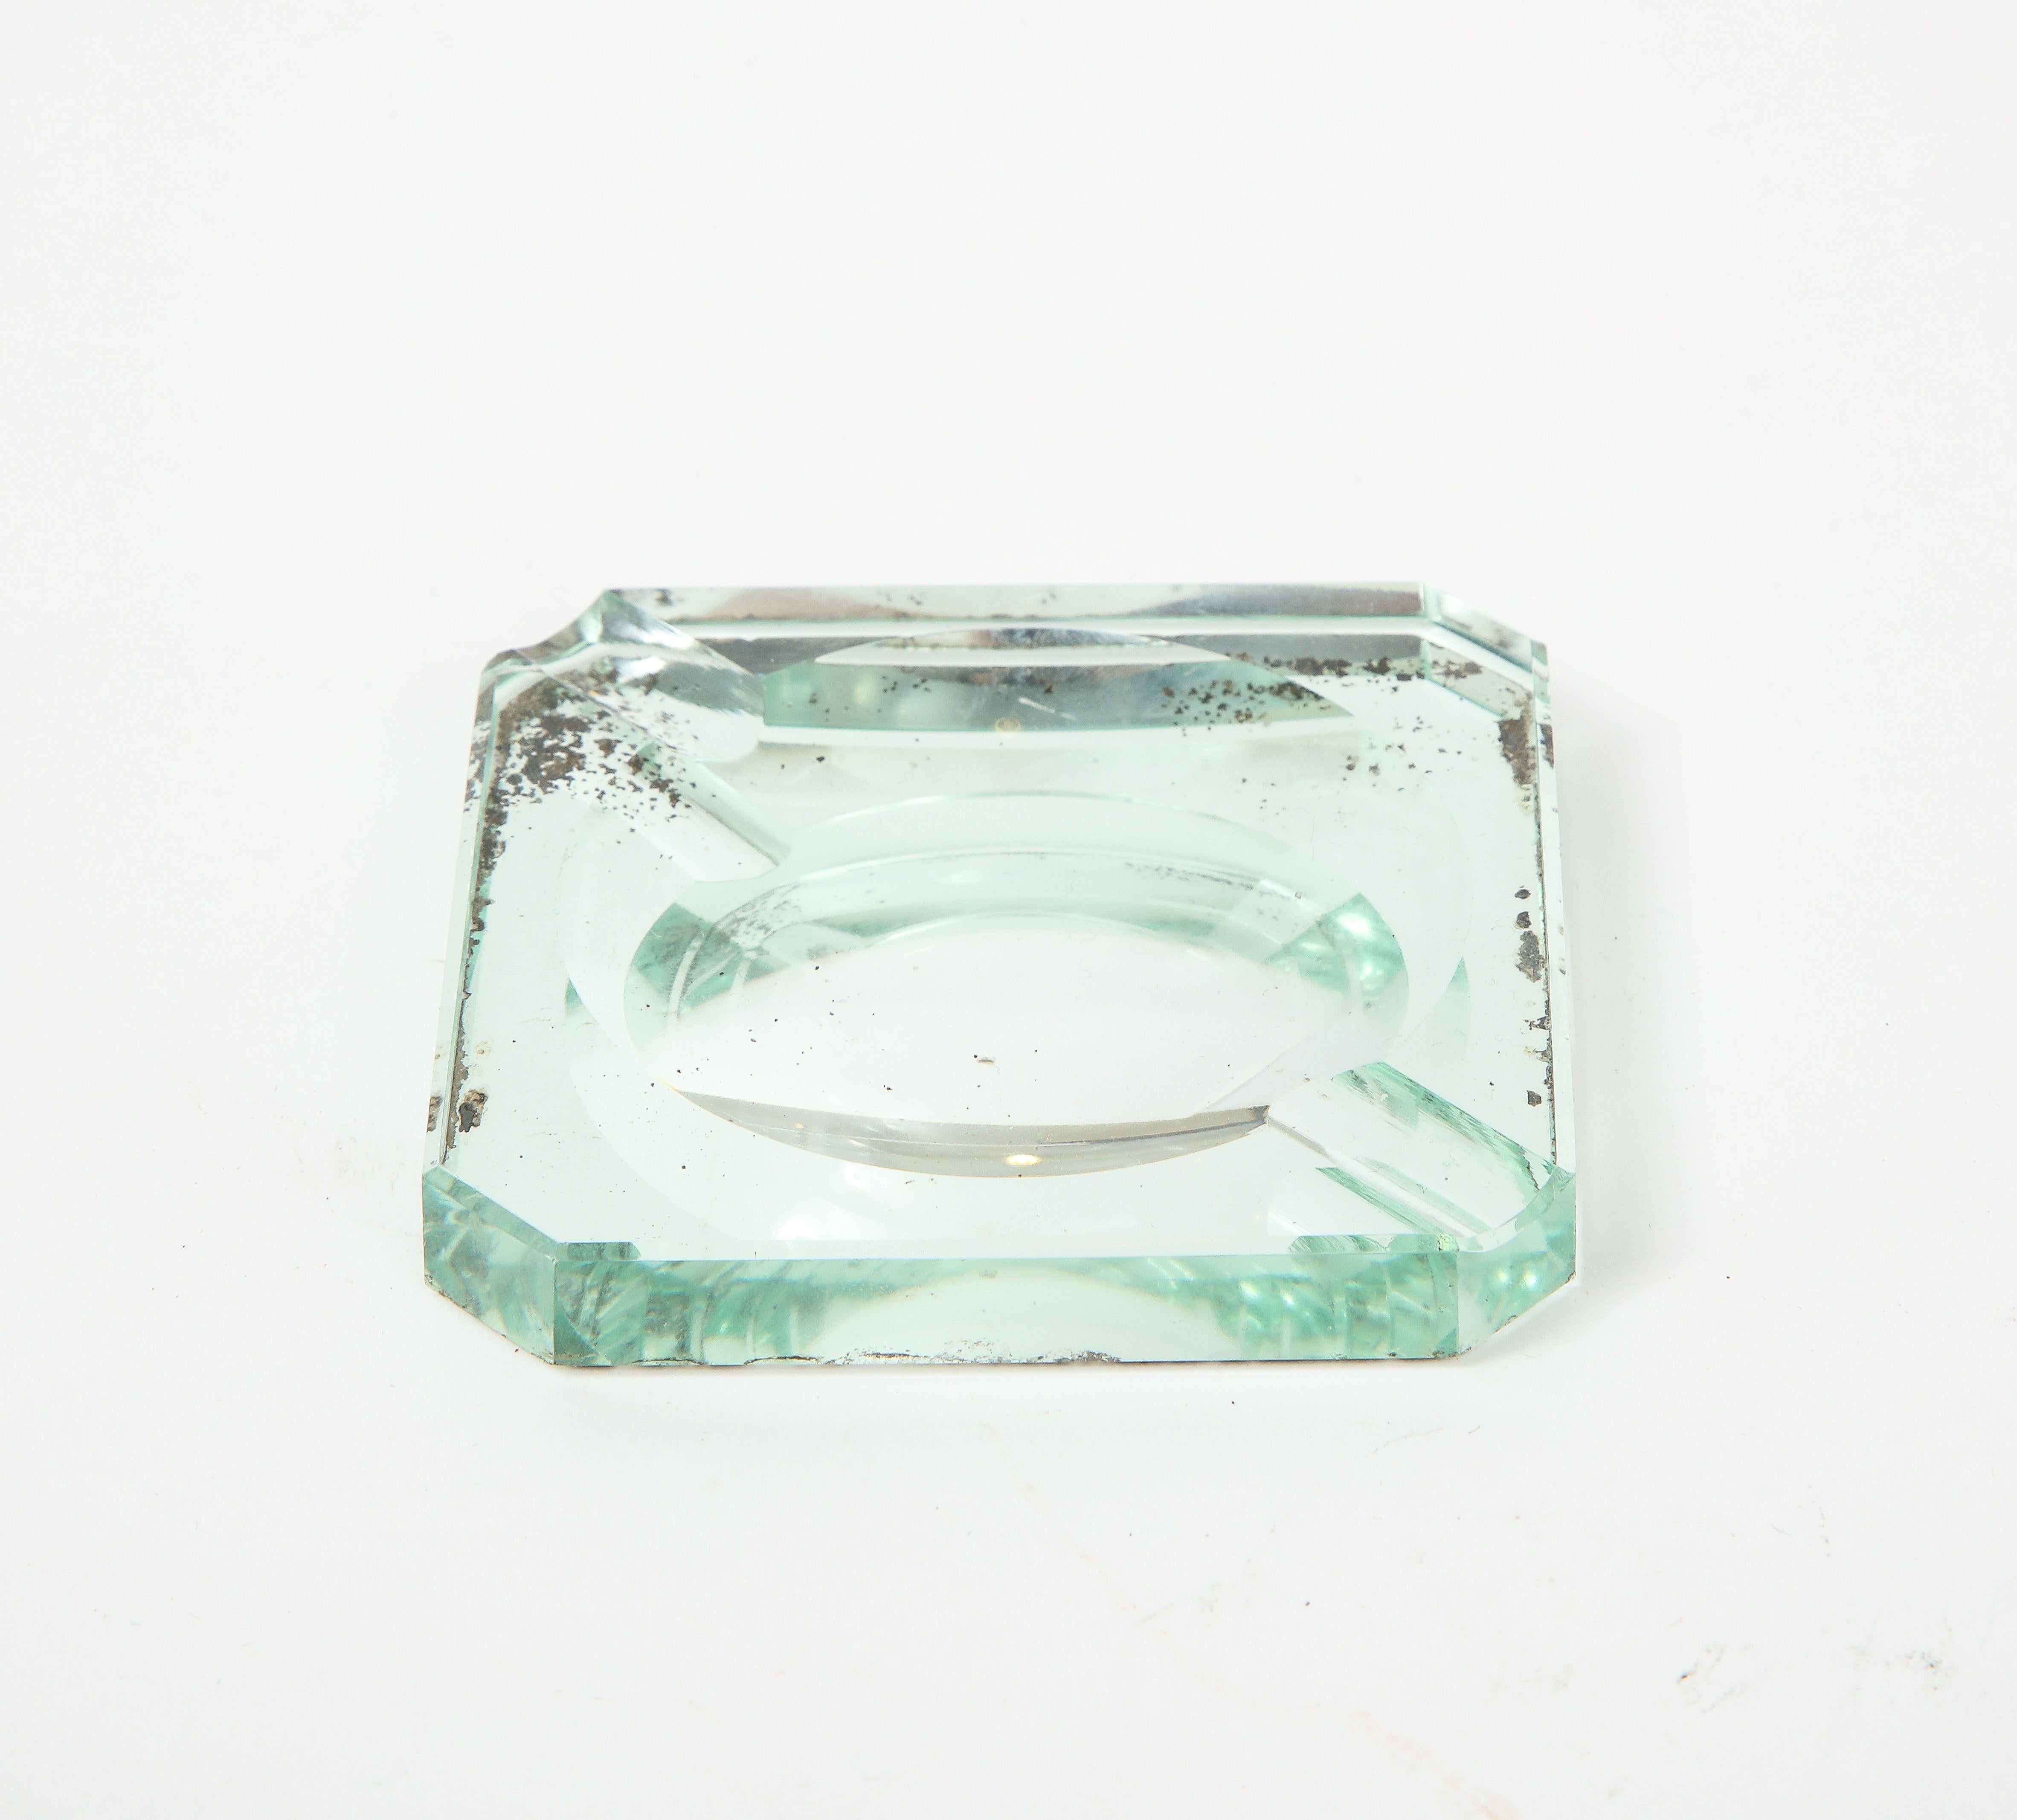 Vintage mirrored ashtray in a hexagonal shape.